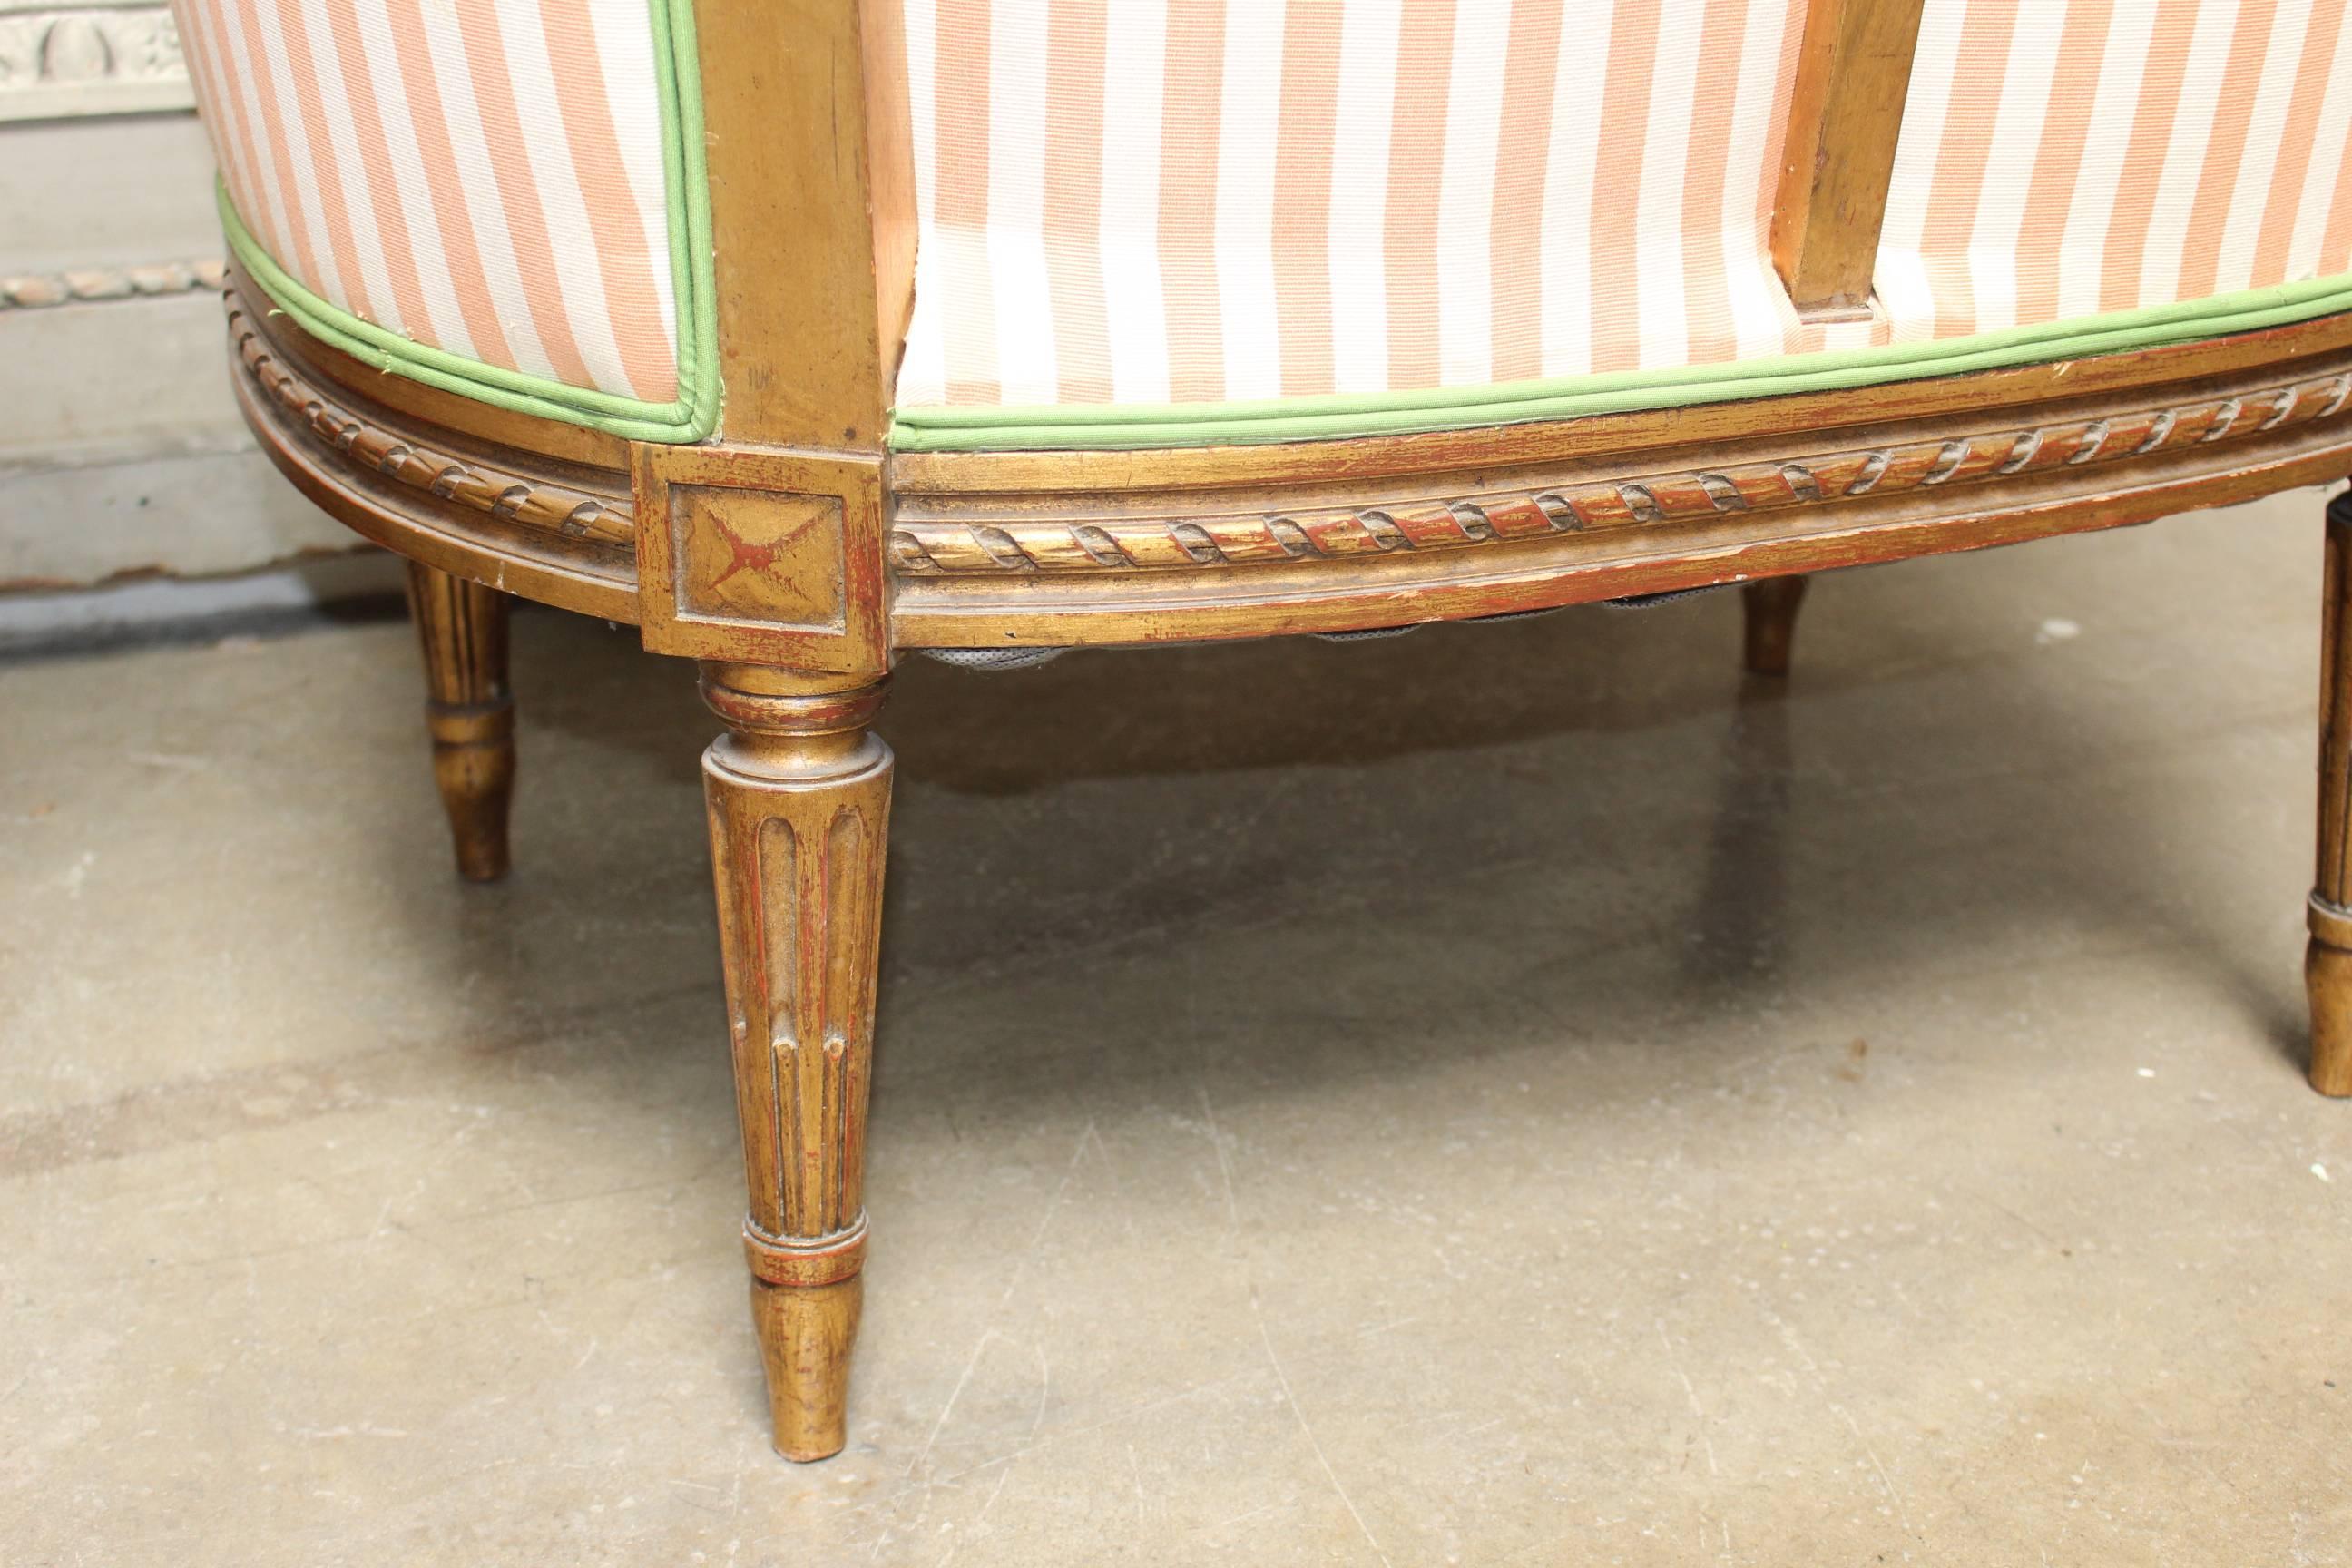 Wood Pair of 19th Century French Louis XVI Style Armchairs with a Gold Leaf Finish For Sale